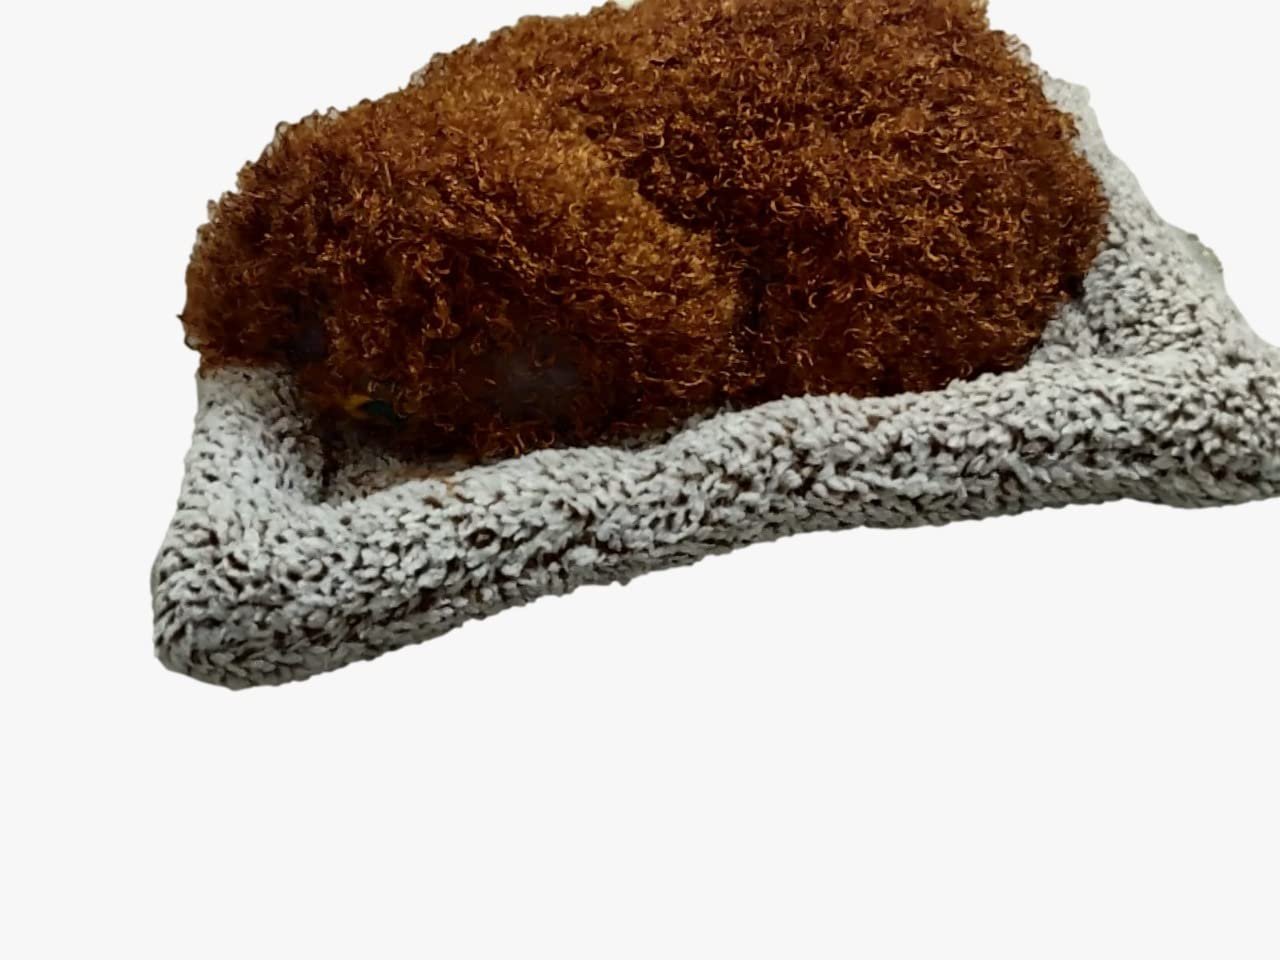 Car Dashboard Soft Fur Dog Brown Toy For Car and Home Decorations Image 